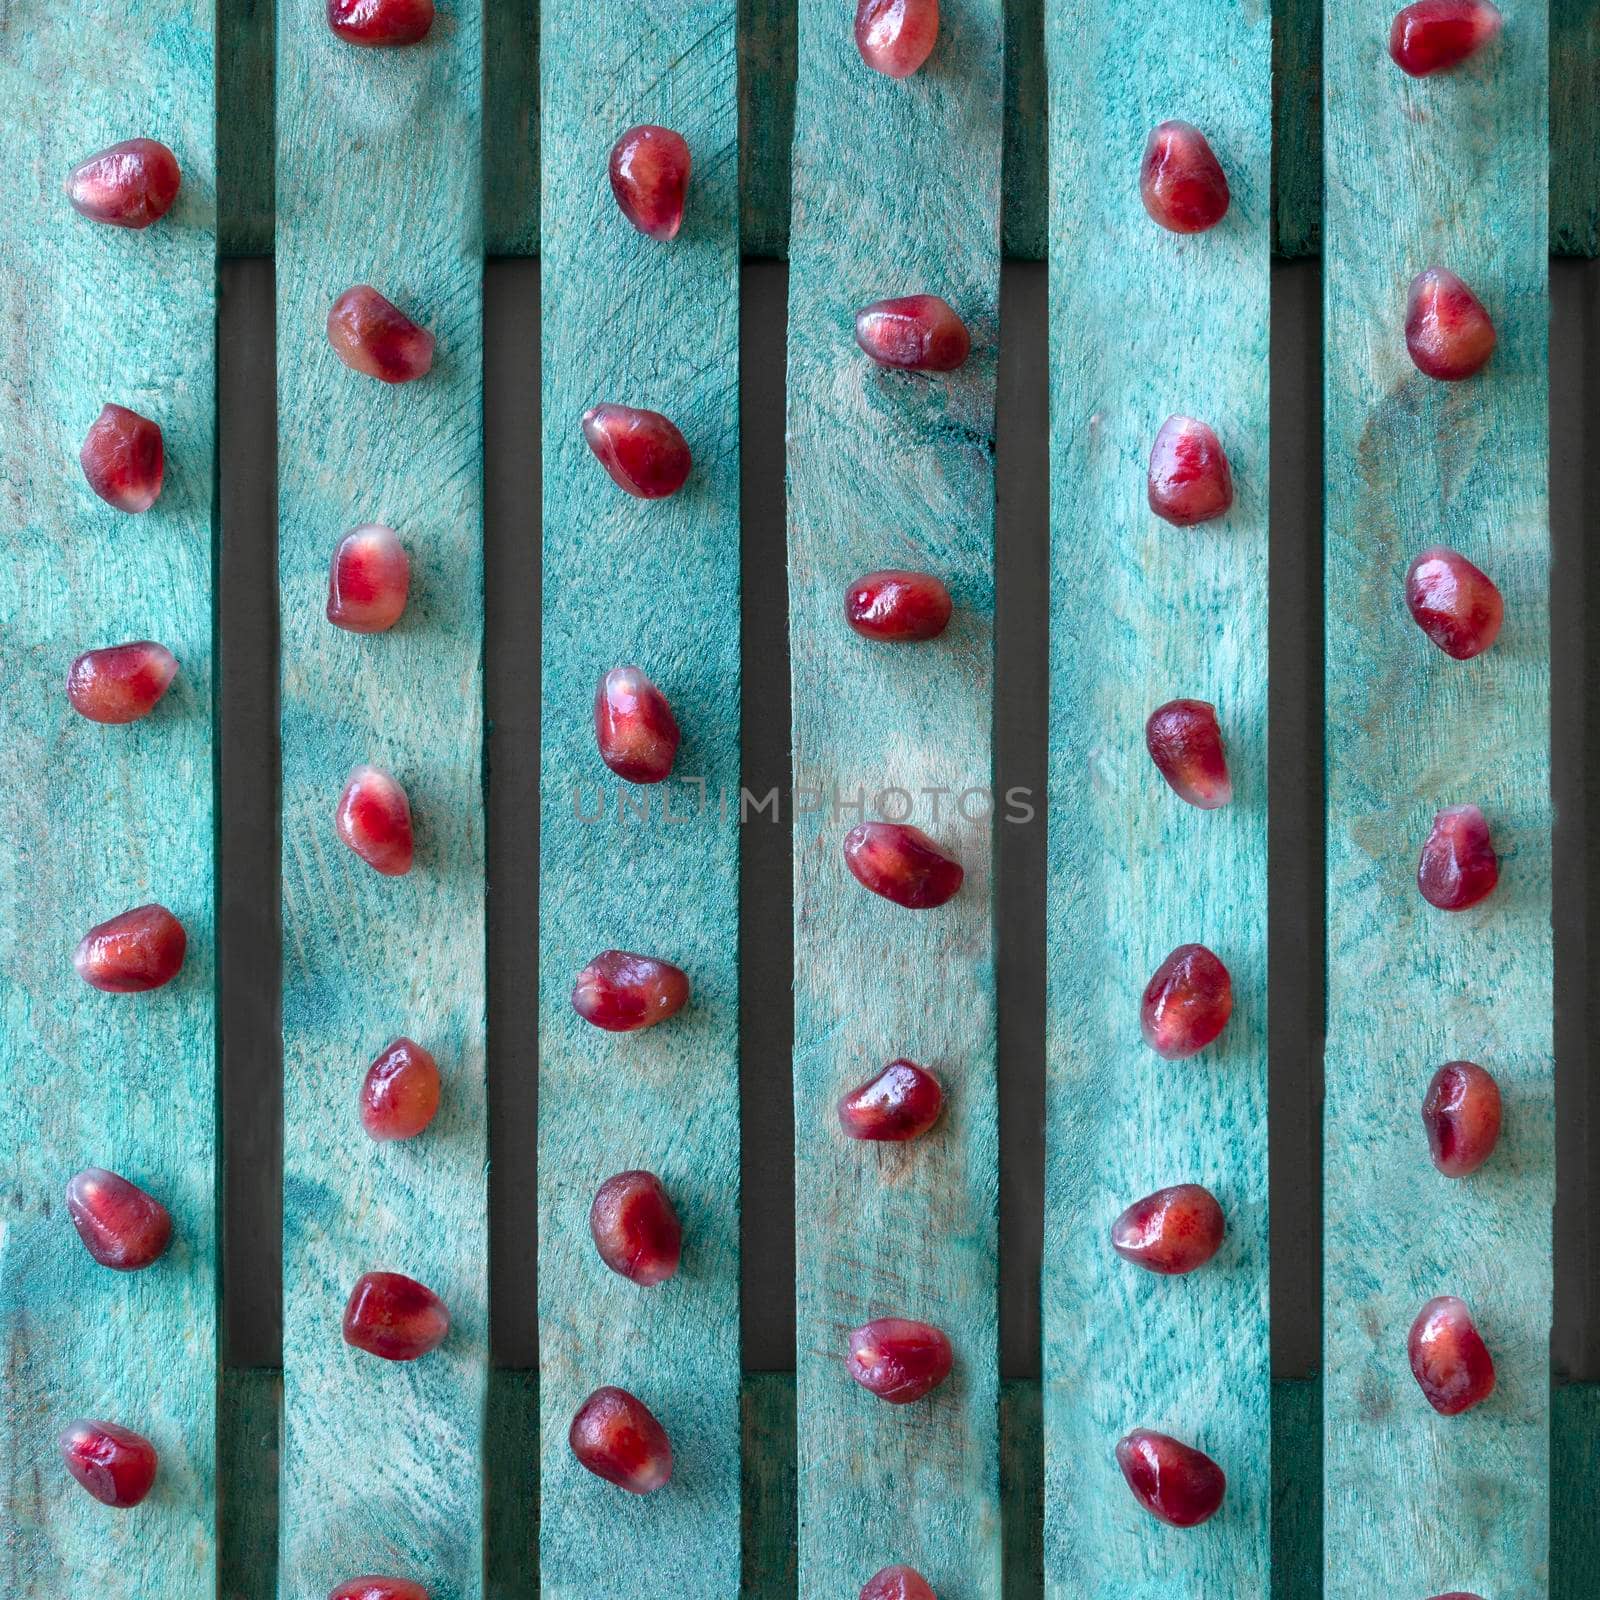 Seamless textured background in contrasting colors. Red pomegranate seeds on a turquoise board.